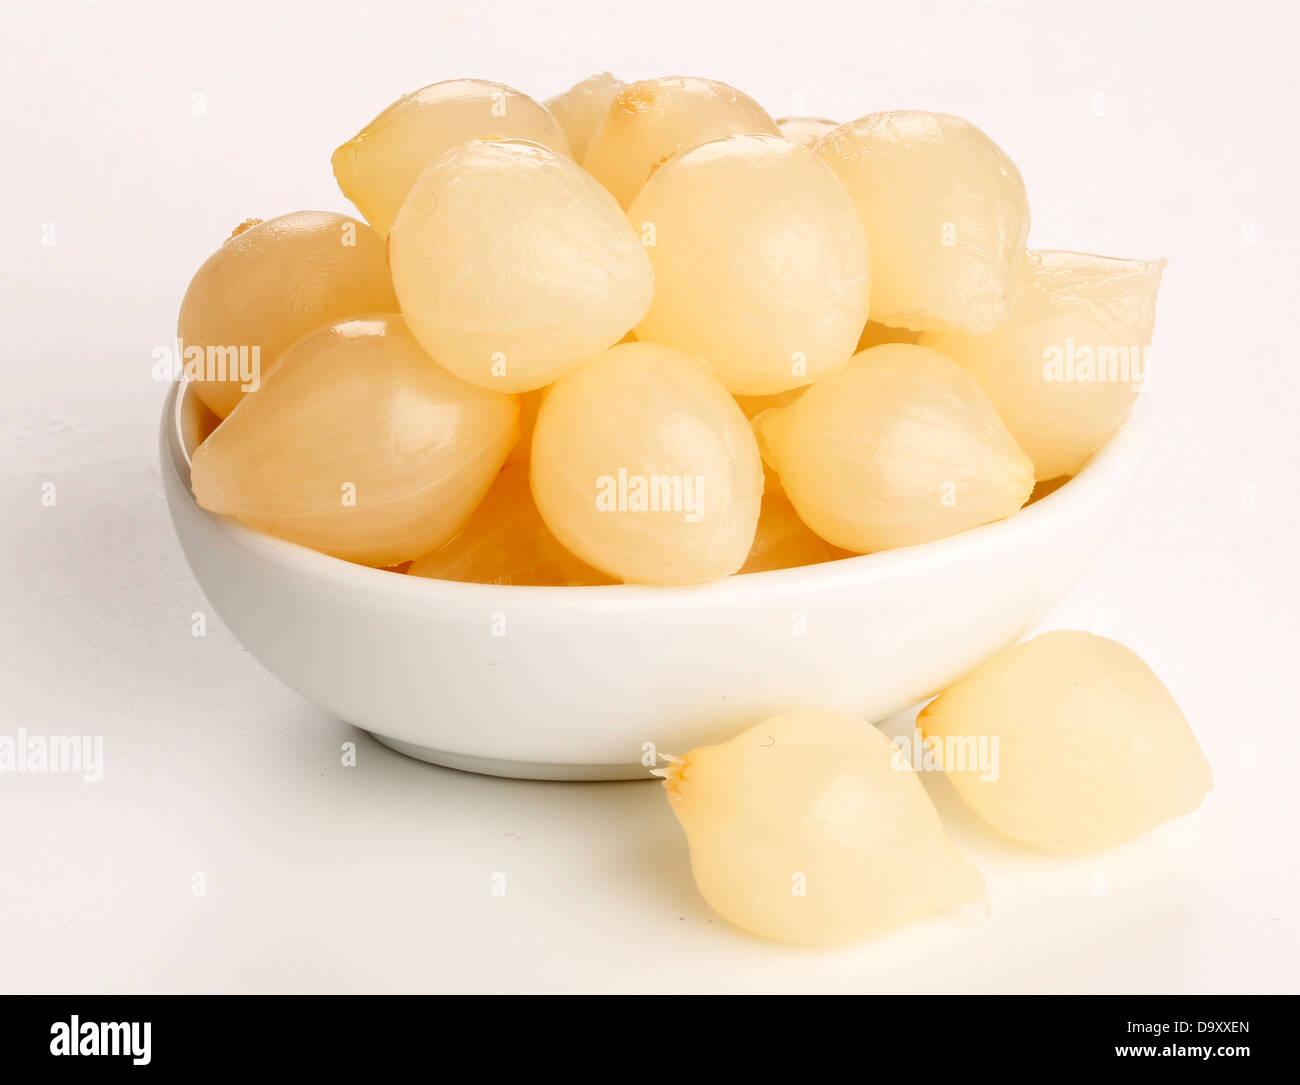 PICKLED SILVERSKIN ONIONS Stock Photo